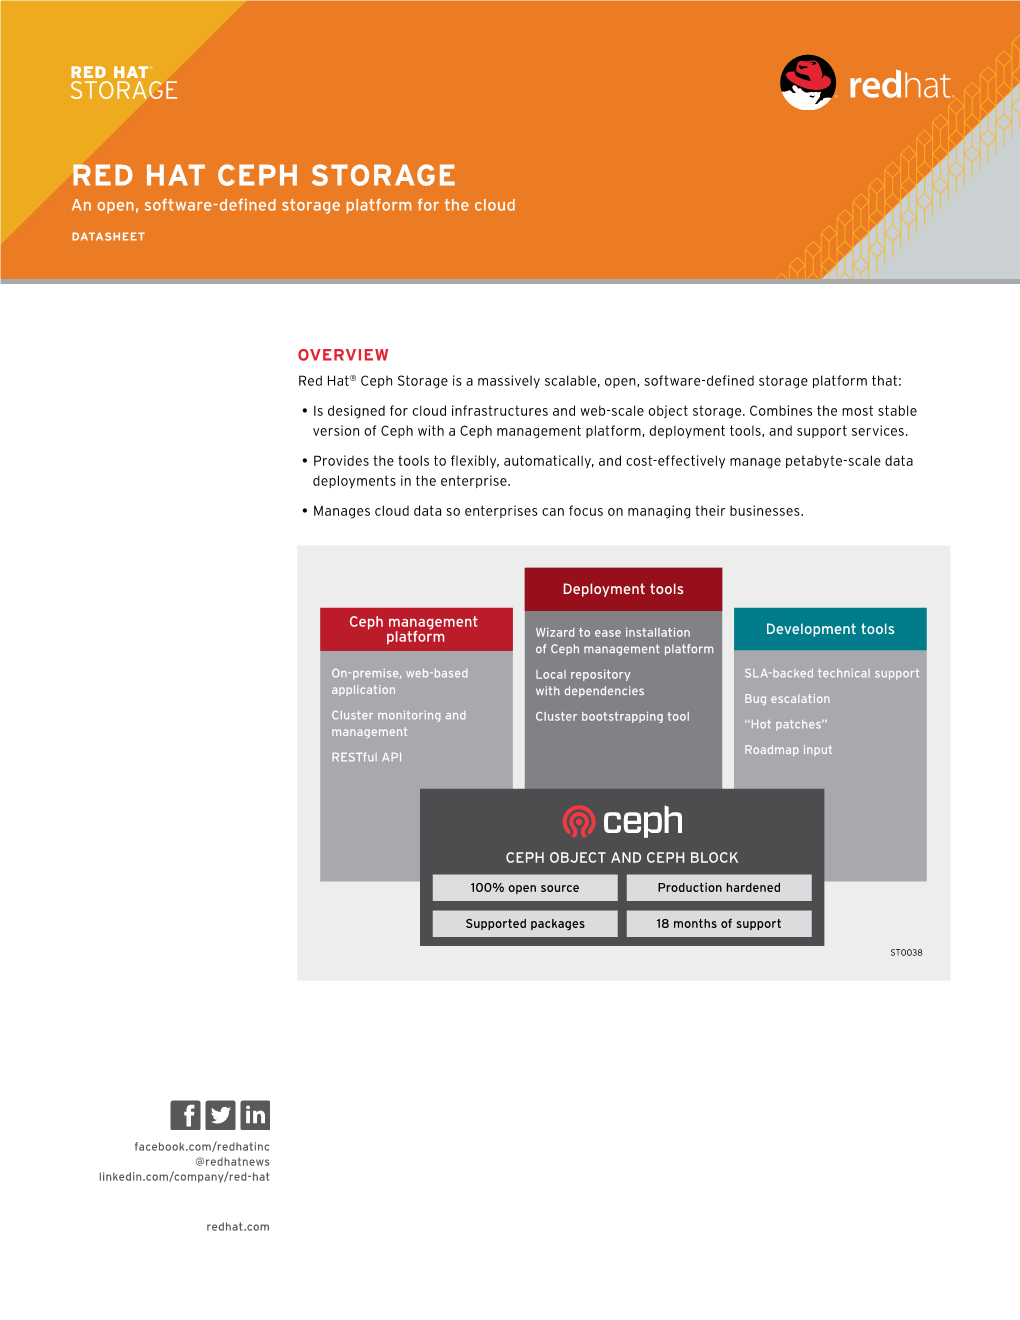 RED HAT CEPH STORAGE an Open, Software-Defined Storage Platform for the Cloud